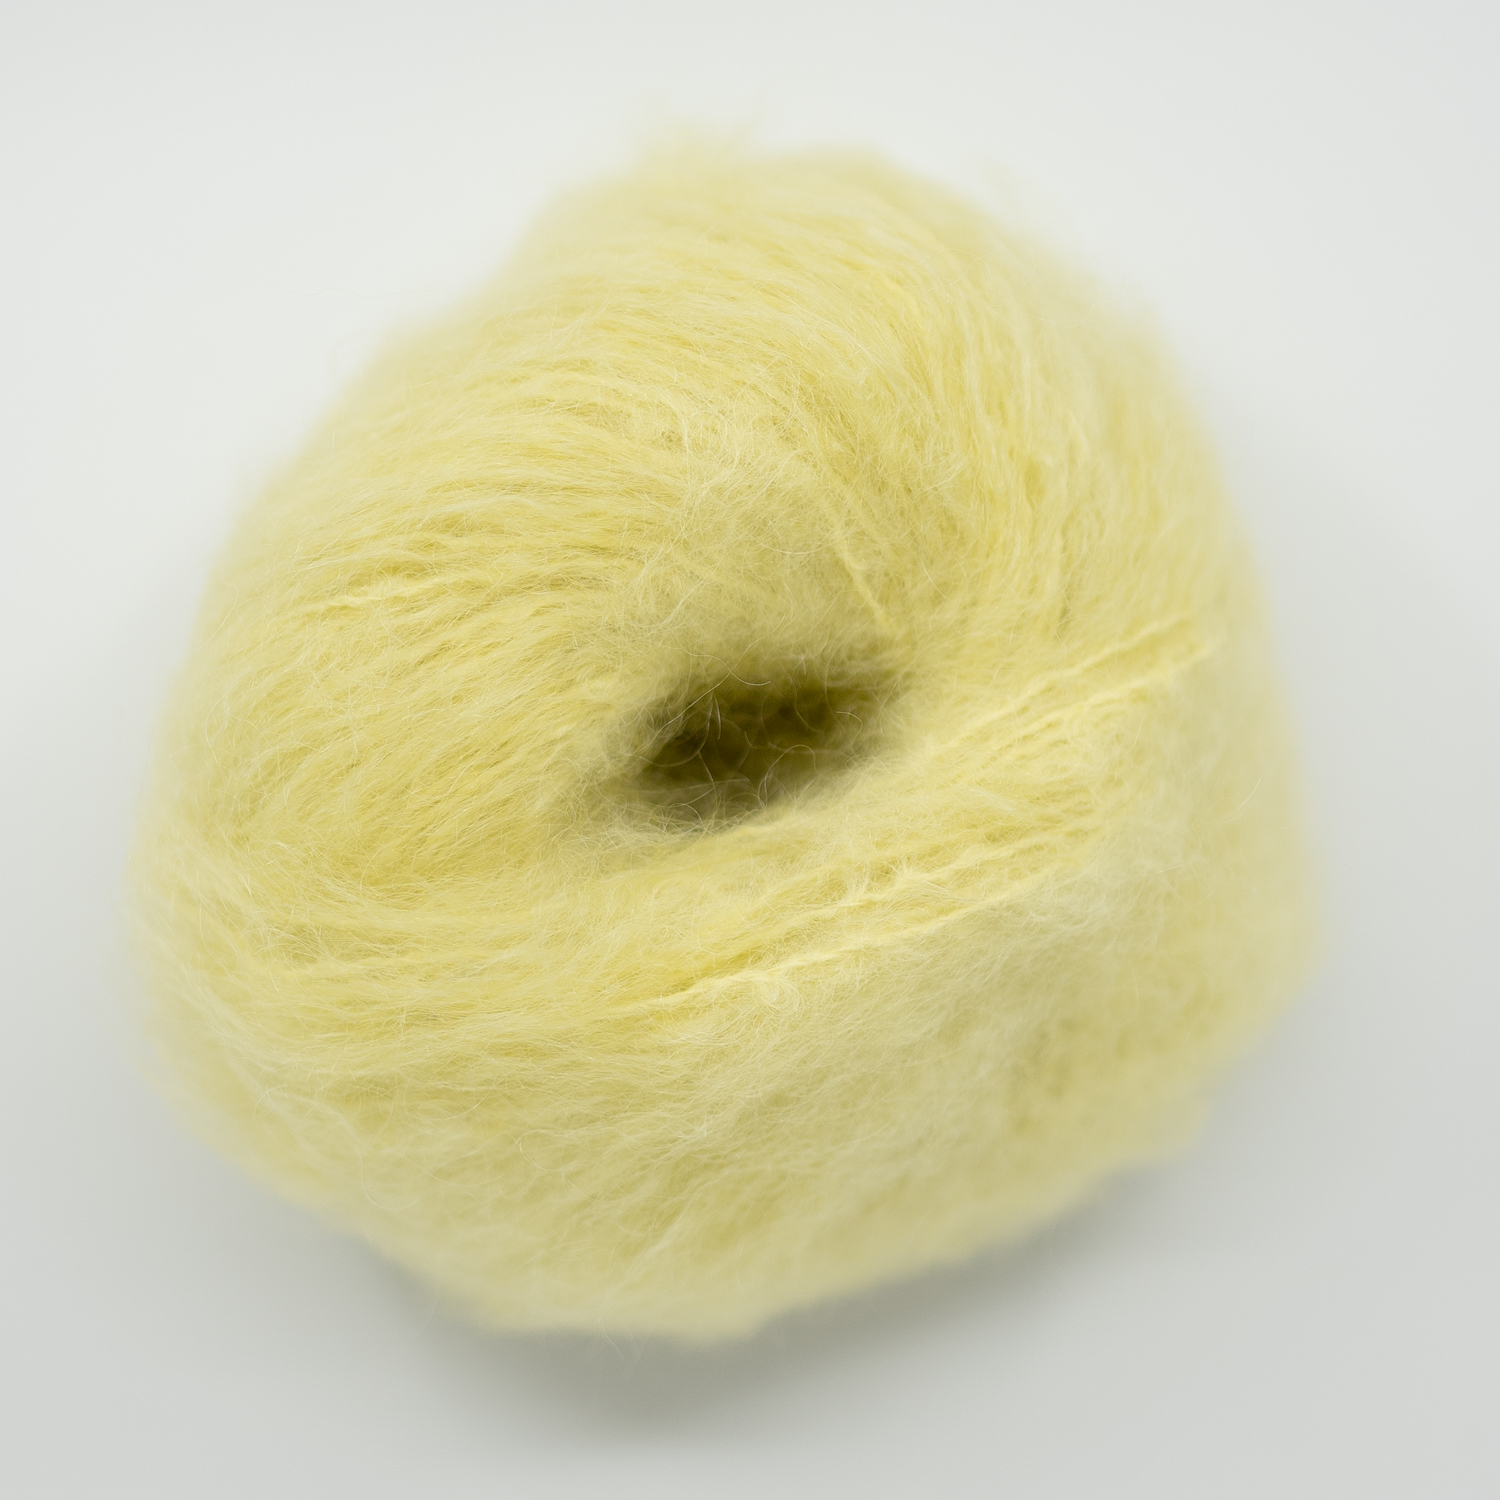  - Lime yellow | yellow mohair yarn | Fluff - by HipKnitShop - 21/09/2022